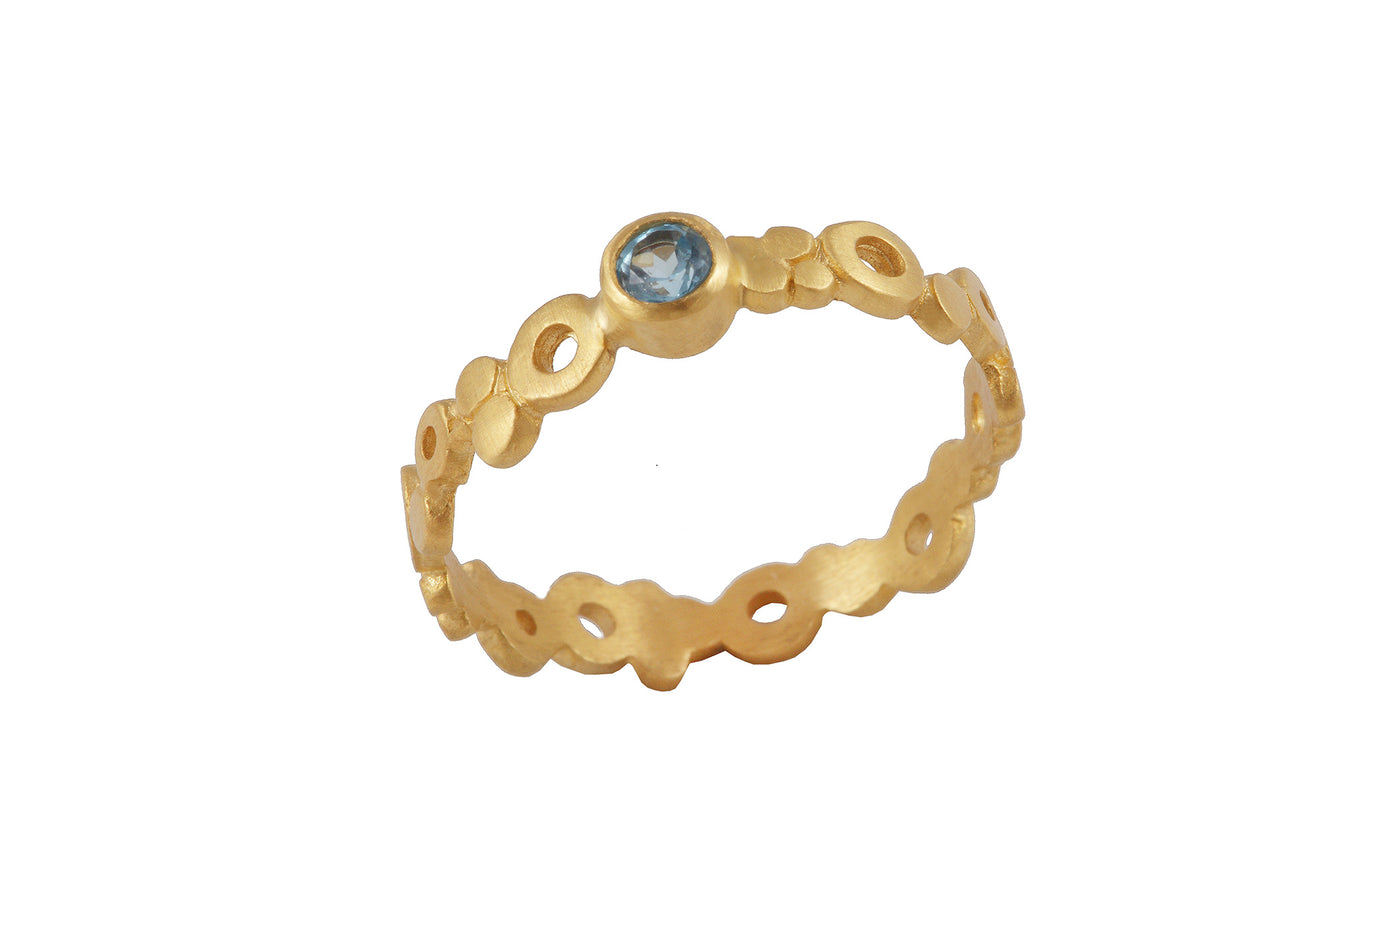 Ring with elements - Air. Gold plated,  blue topaz stone